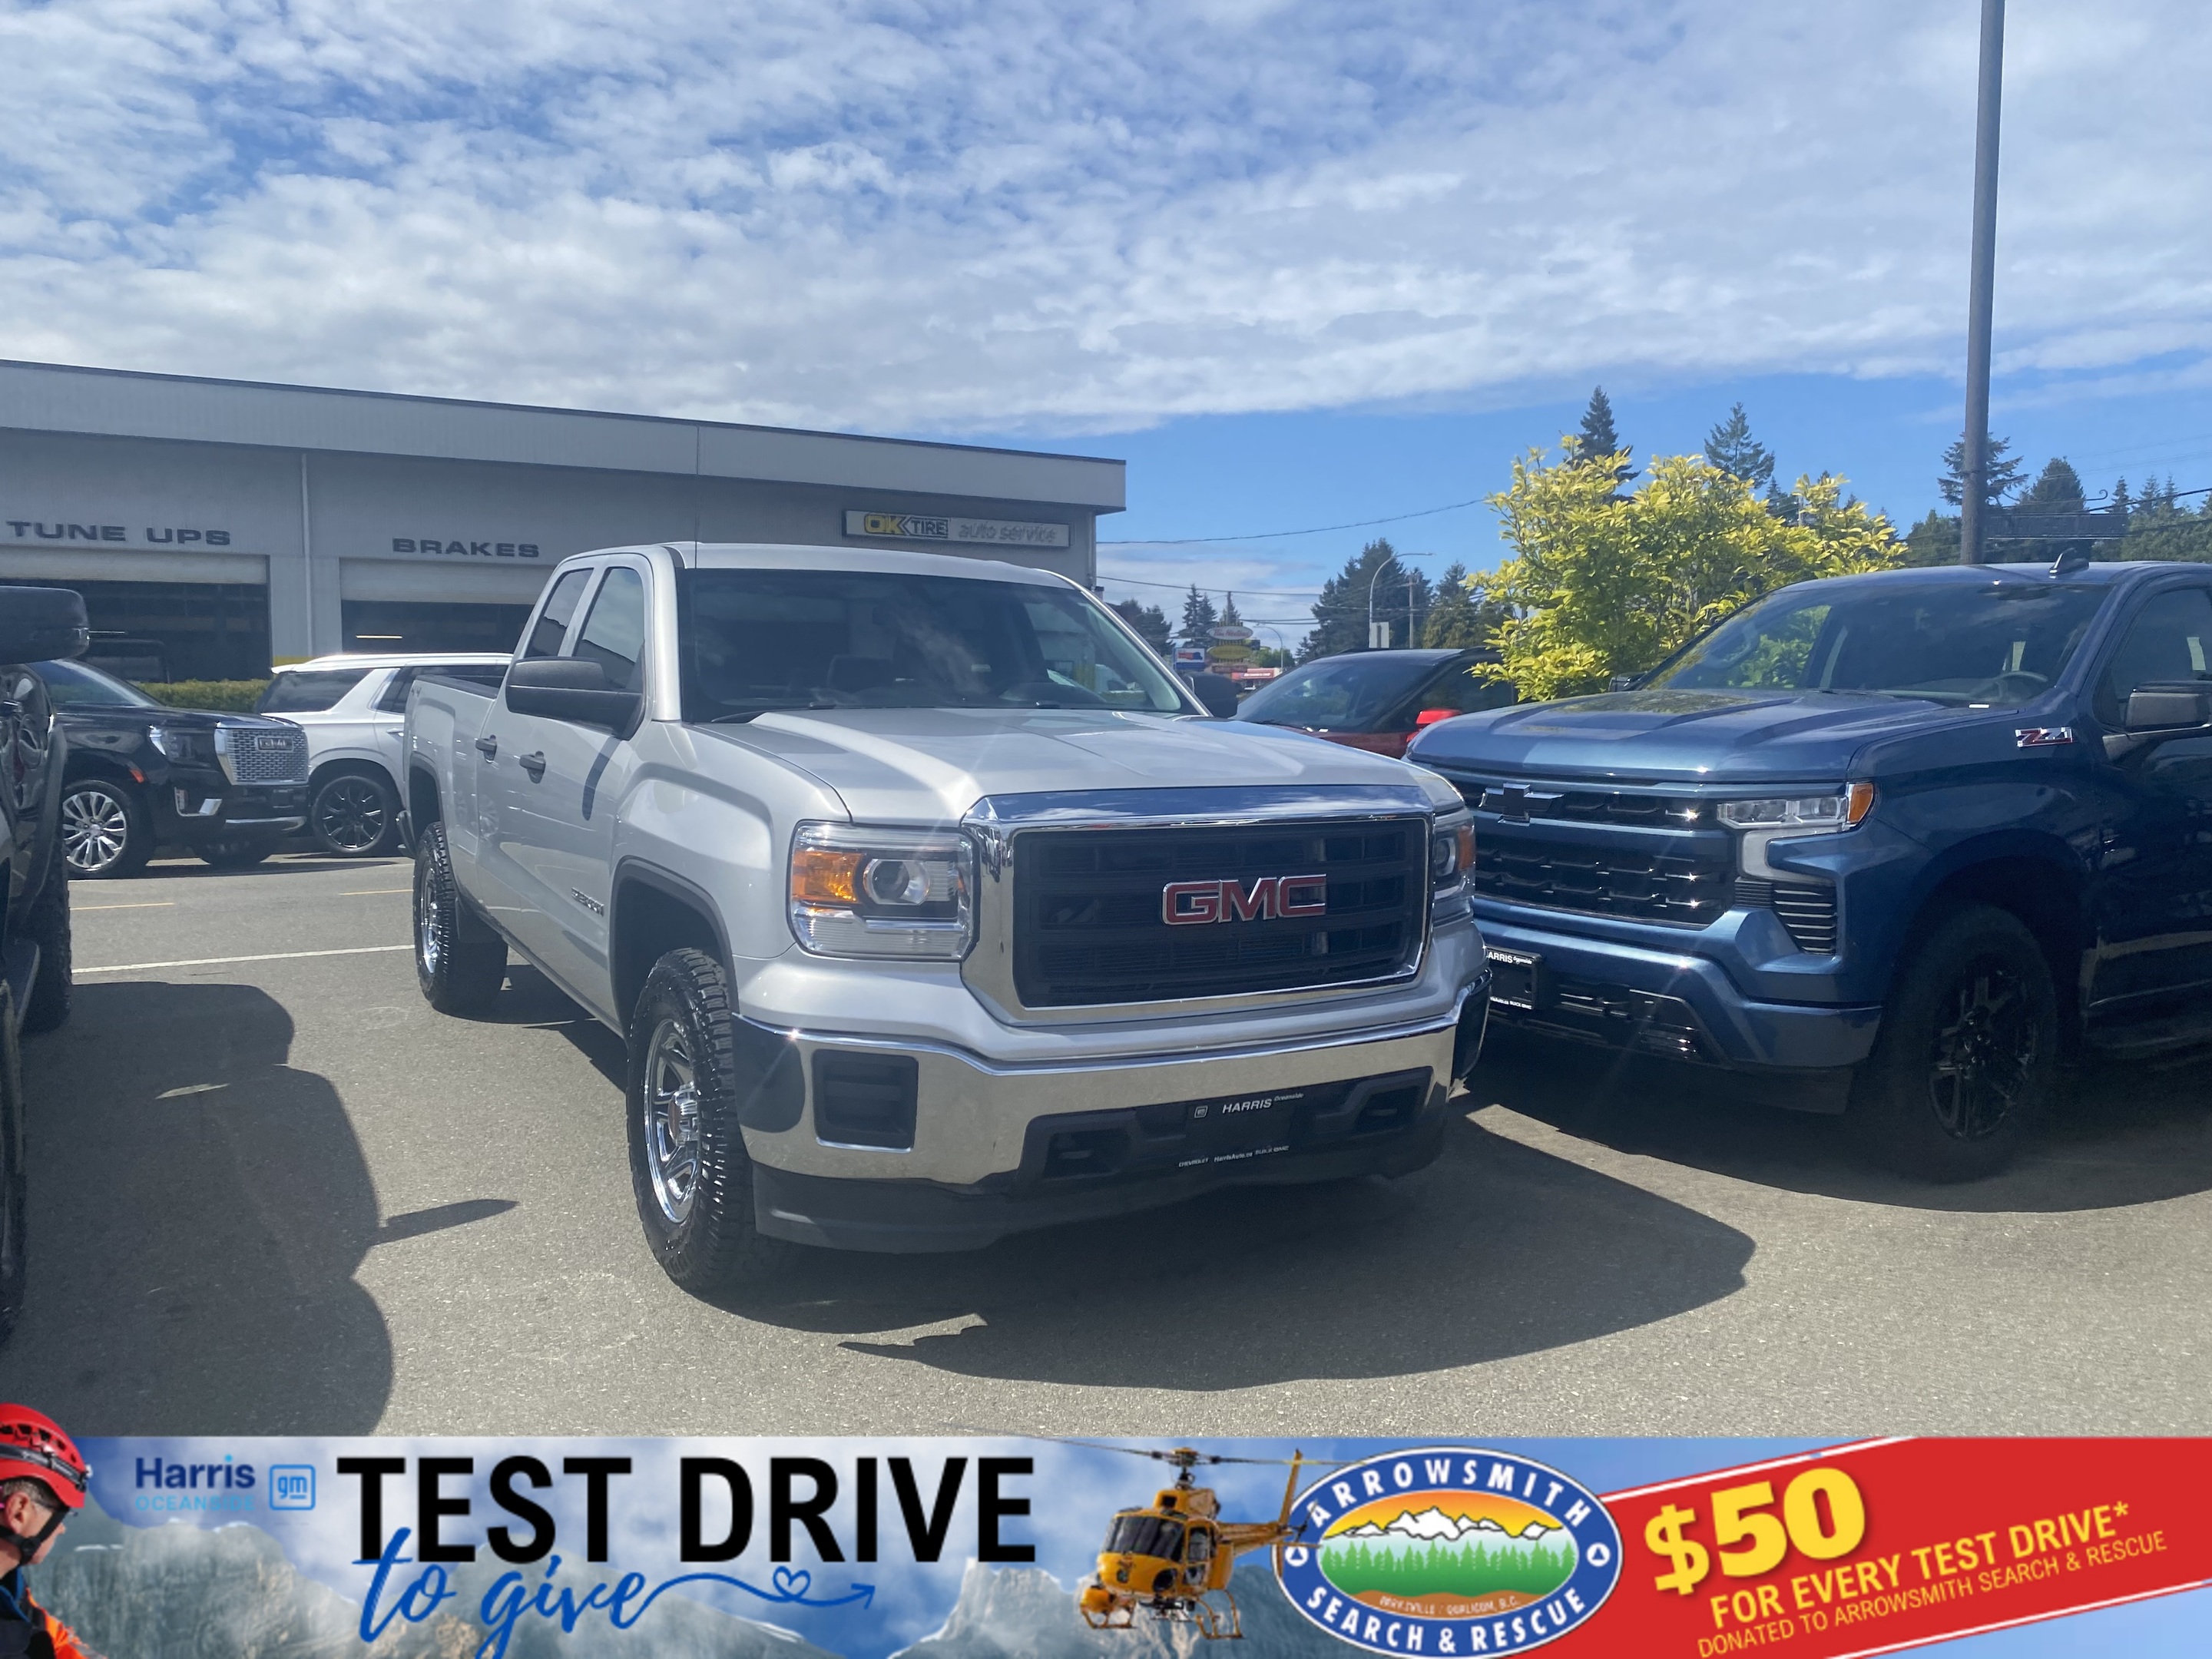 2014 GMC Sierra 1500 | 4WD | Double Cab | Standard Box | Towing |